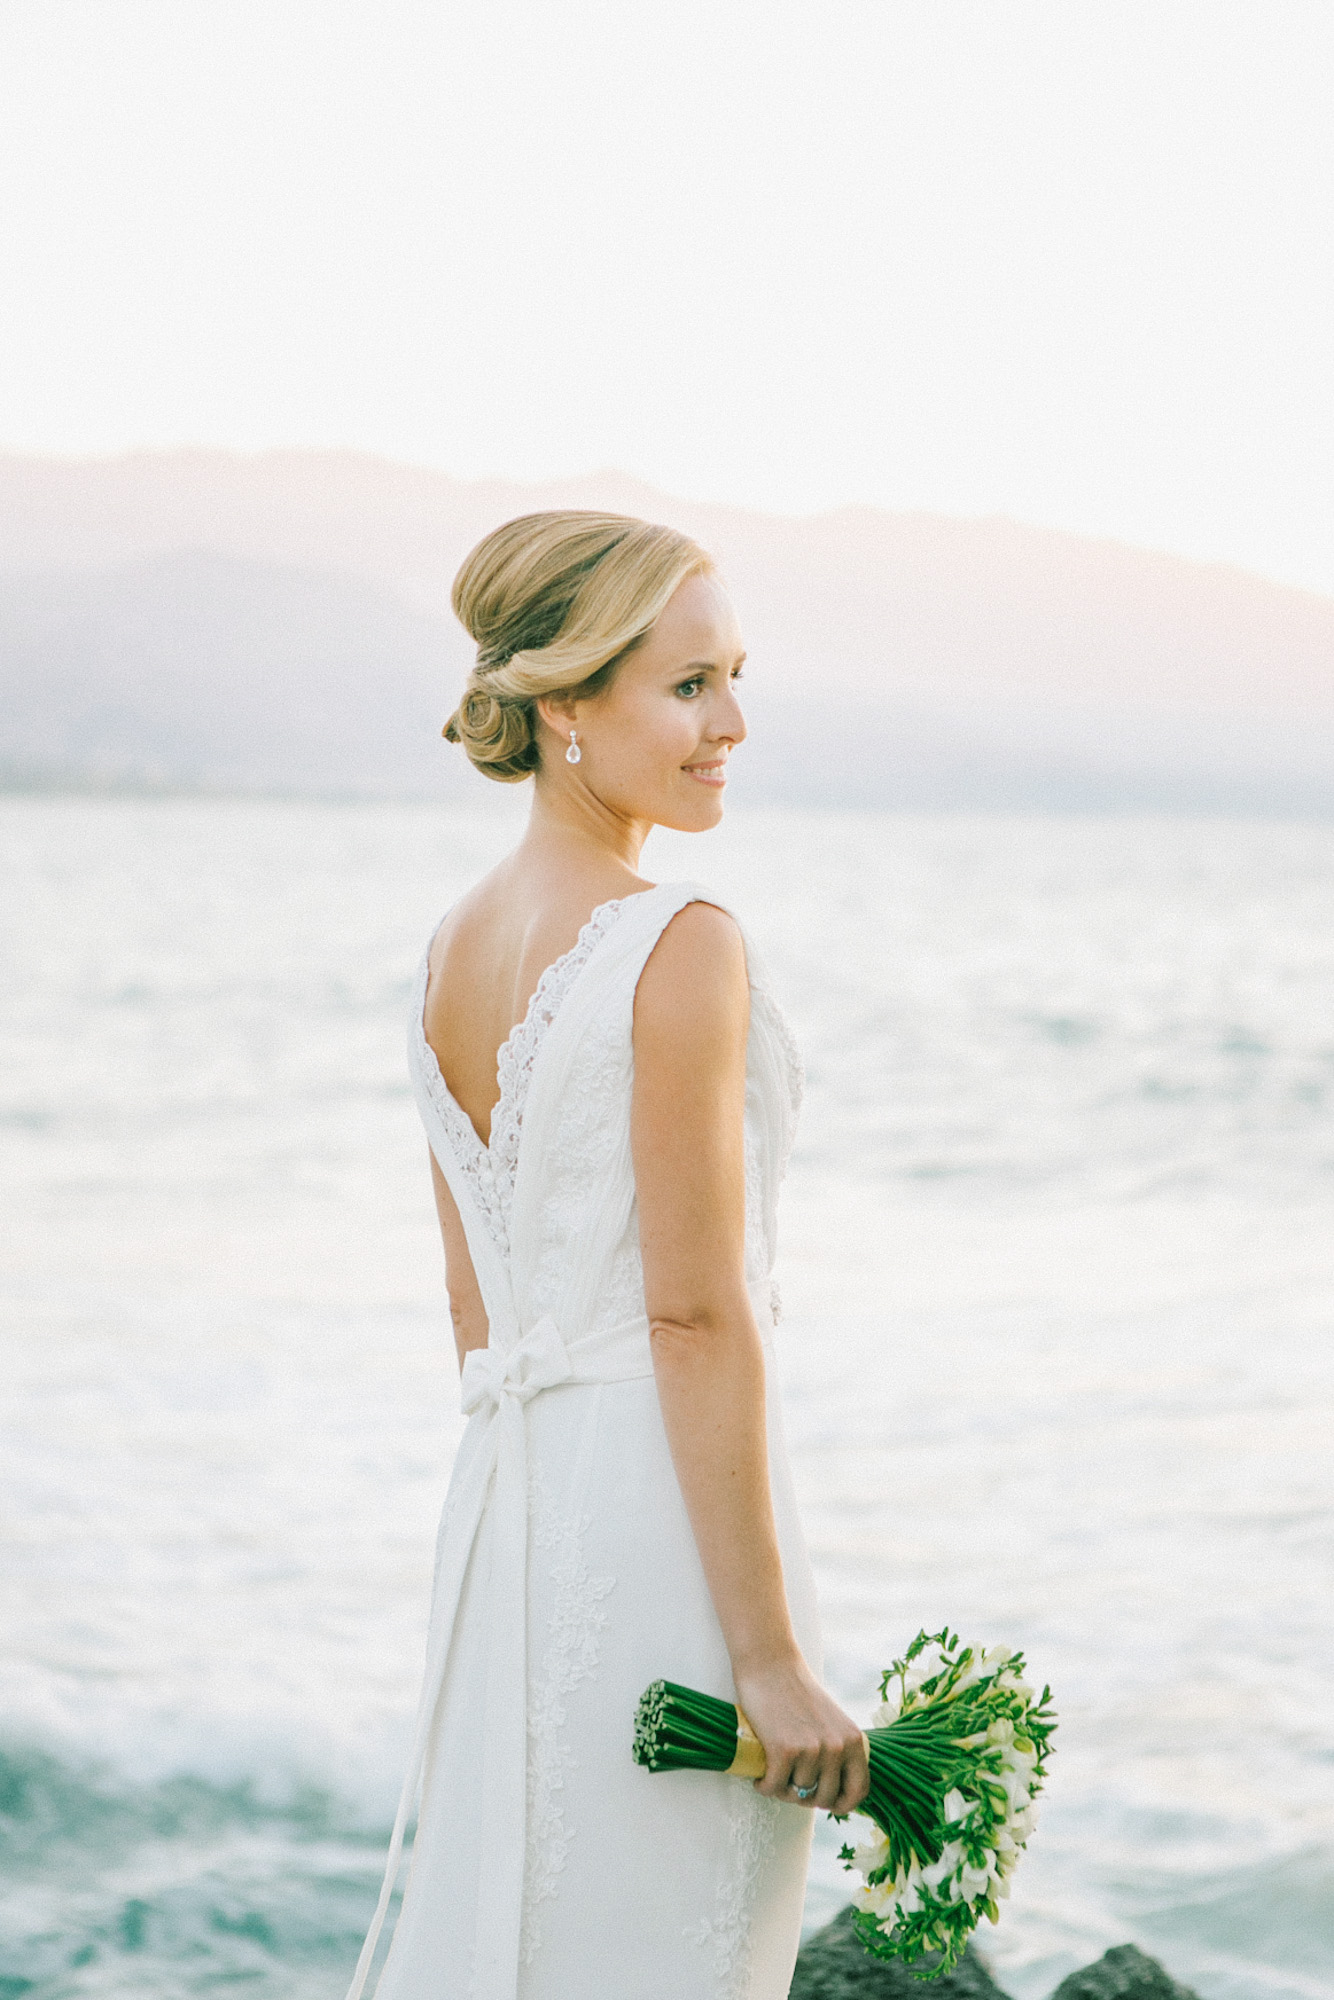 Professional portrait of bride posing for her wedding photographer wearing Pronovias bridal dress and holding flower bouquet captured after the wedding ceremony in palm tree wedding estate in Rethymno Crete with a sunset sea view background.